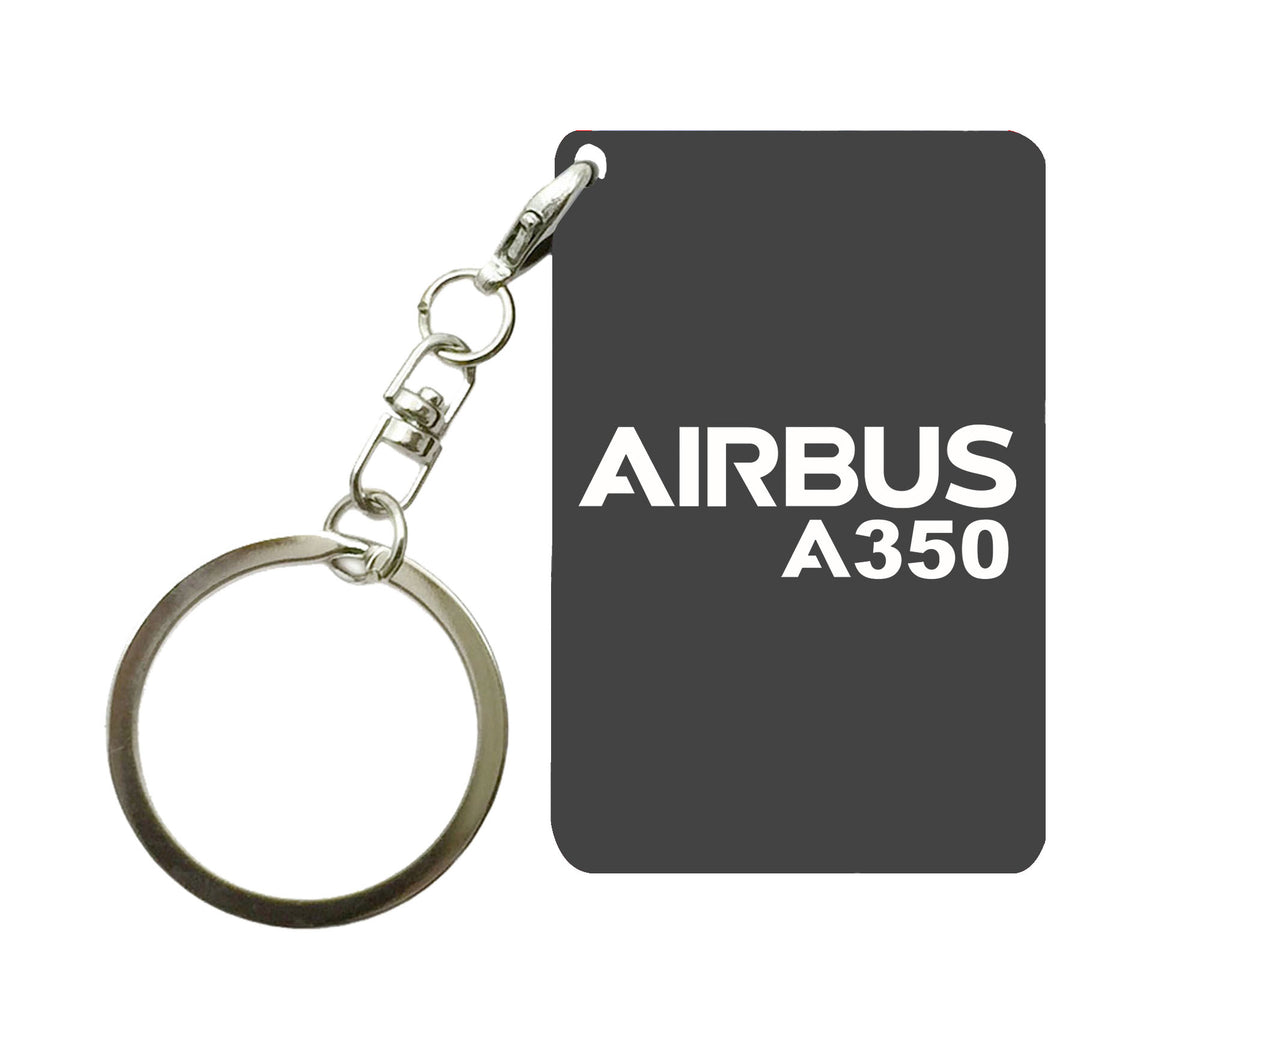 Airbus A350 & Text Designed Key Chains